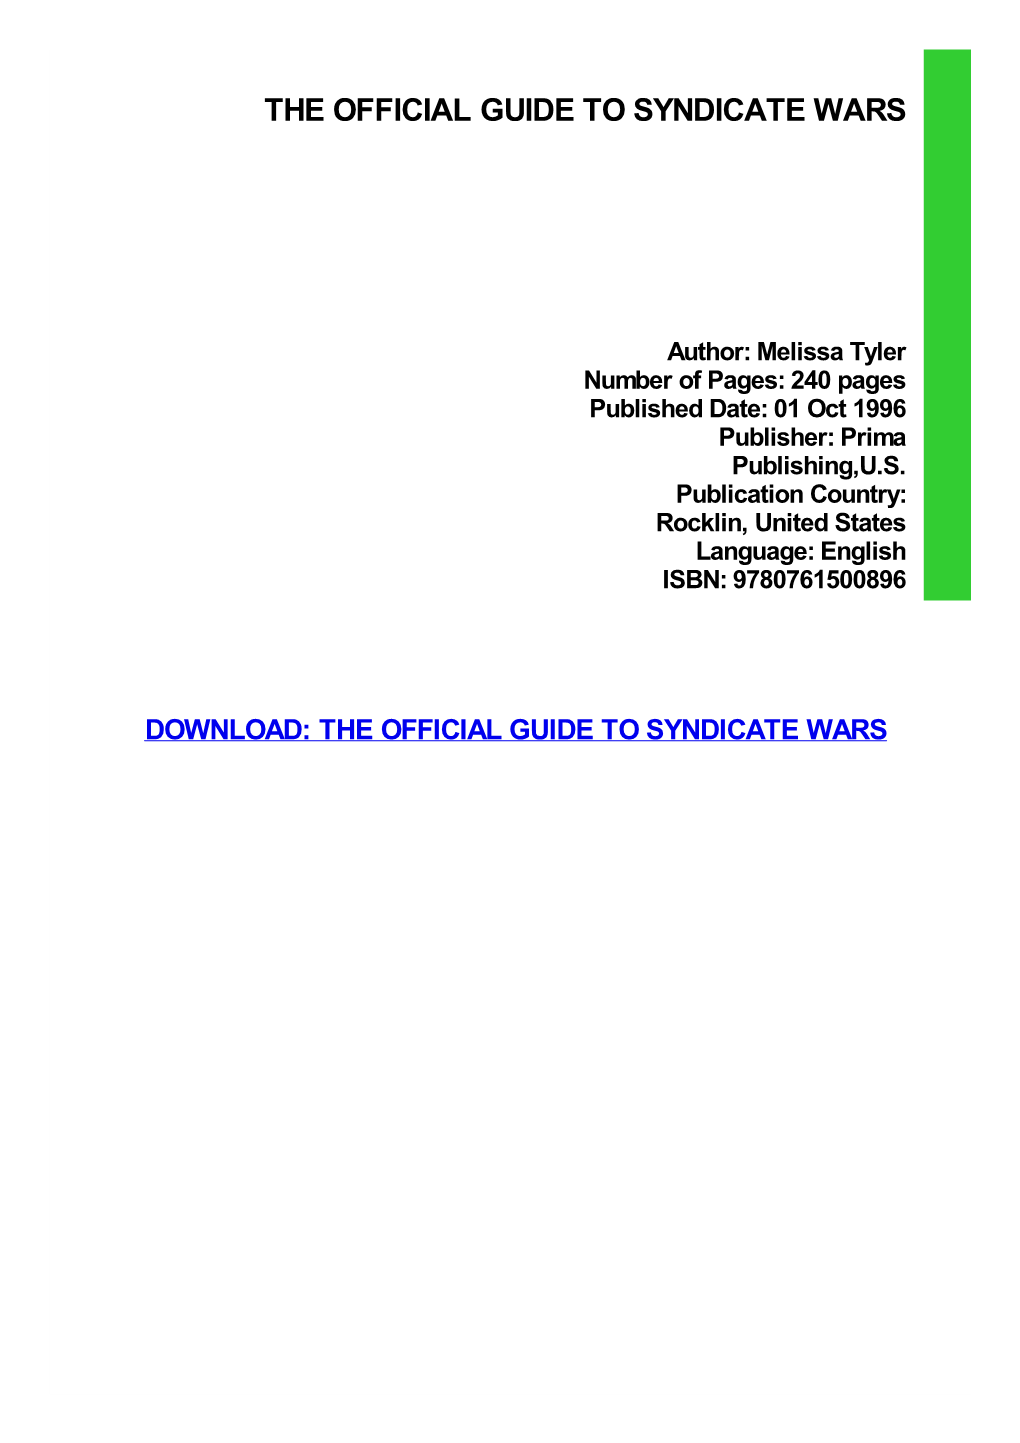 The Official Guide to Syndicate Wars Download Free